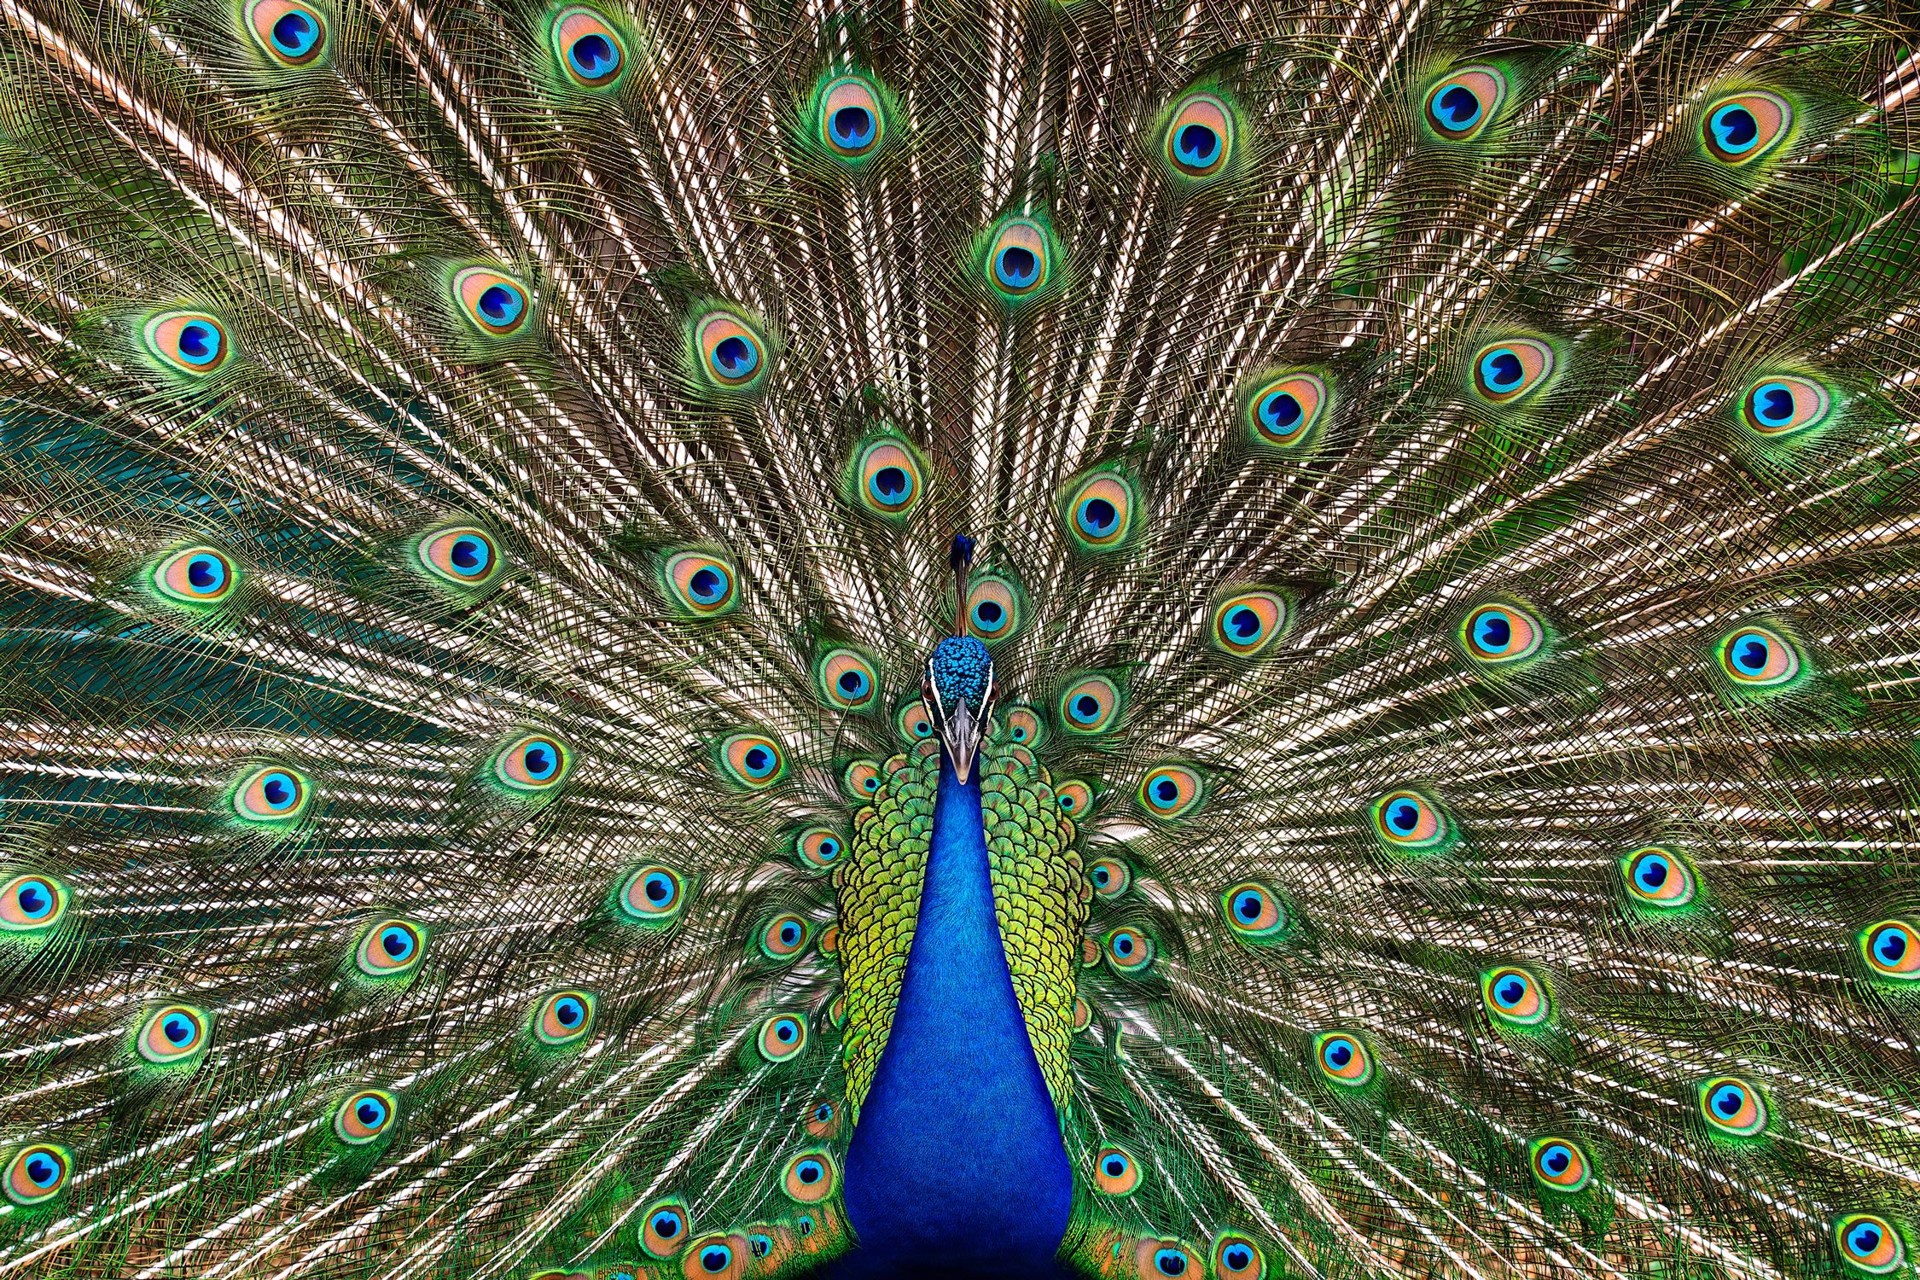 Strutting Peacock No. 1 by Randal Ford